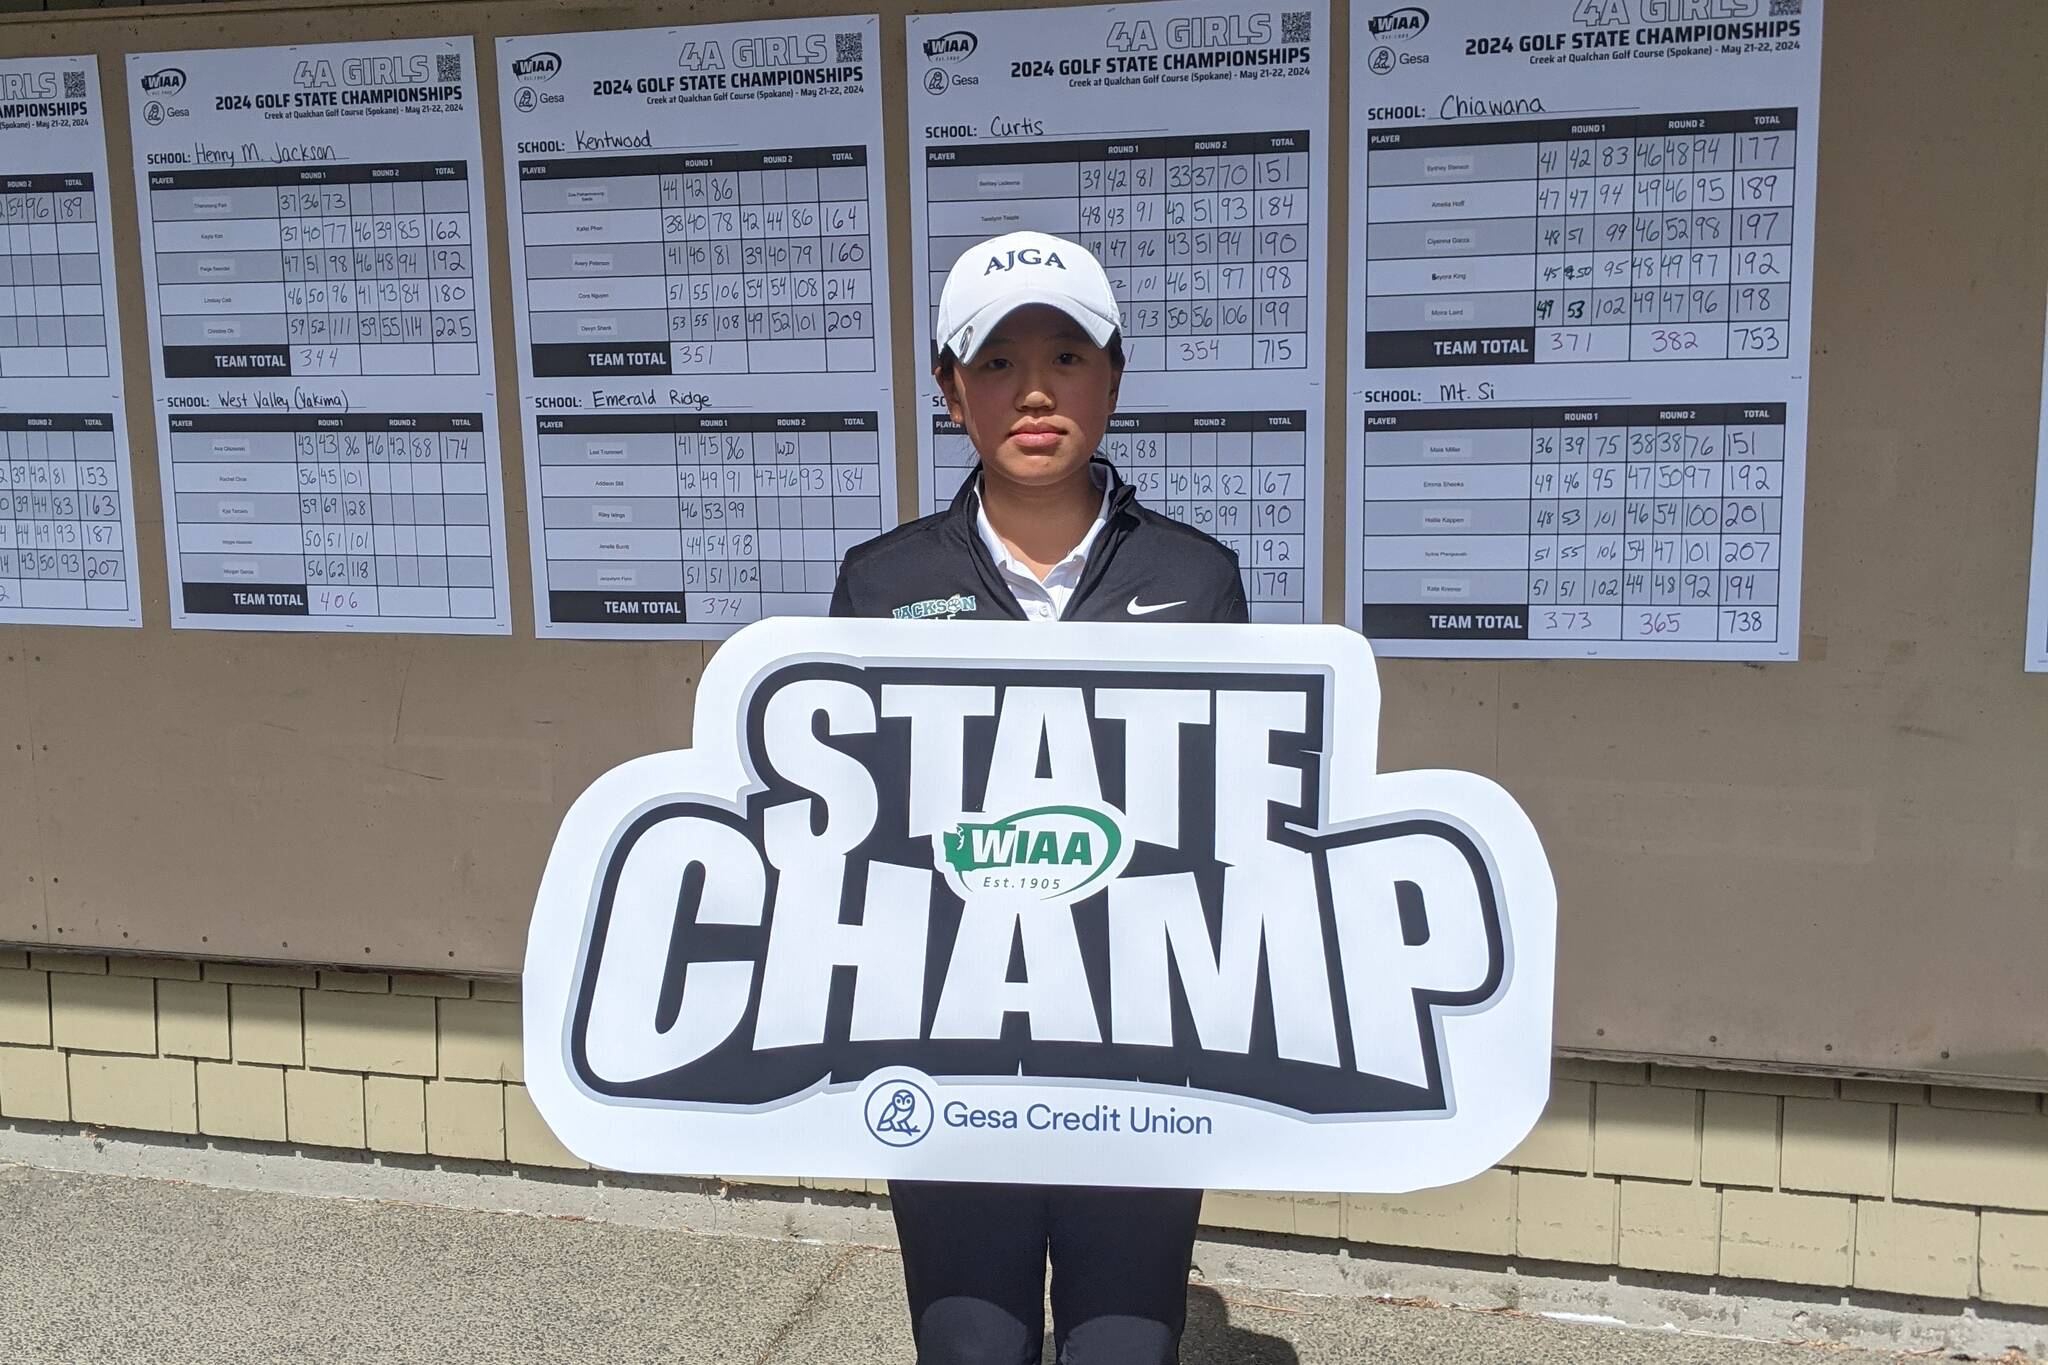 Jackson High School freshman Chanyoung Park won the Class 4A state girls golf championship last Tuesday and Wednesday in Spokane. (Photo courtesy of Jerome Gotz)